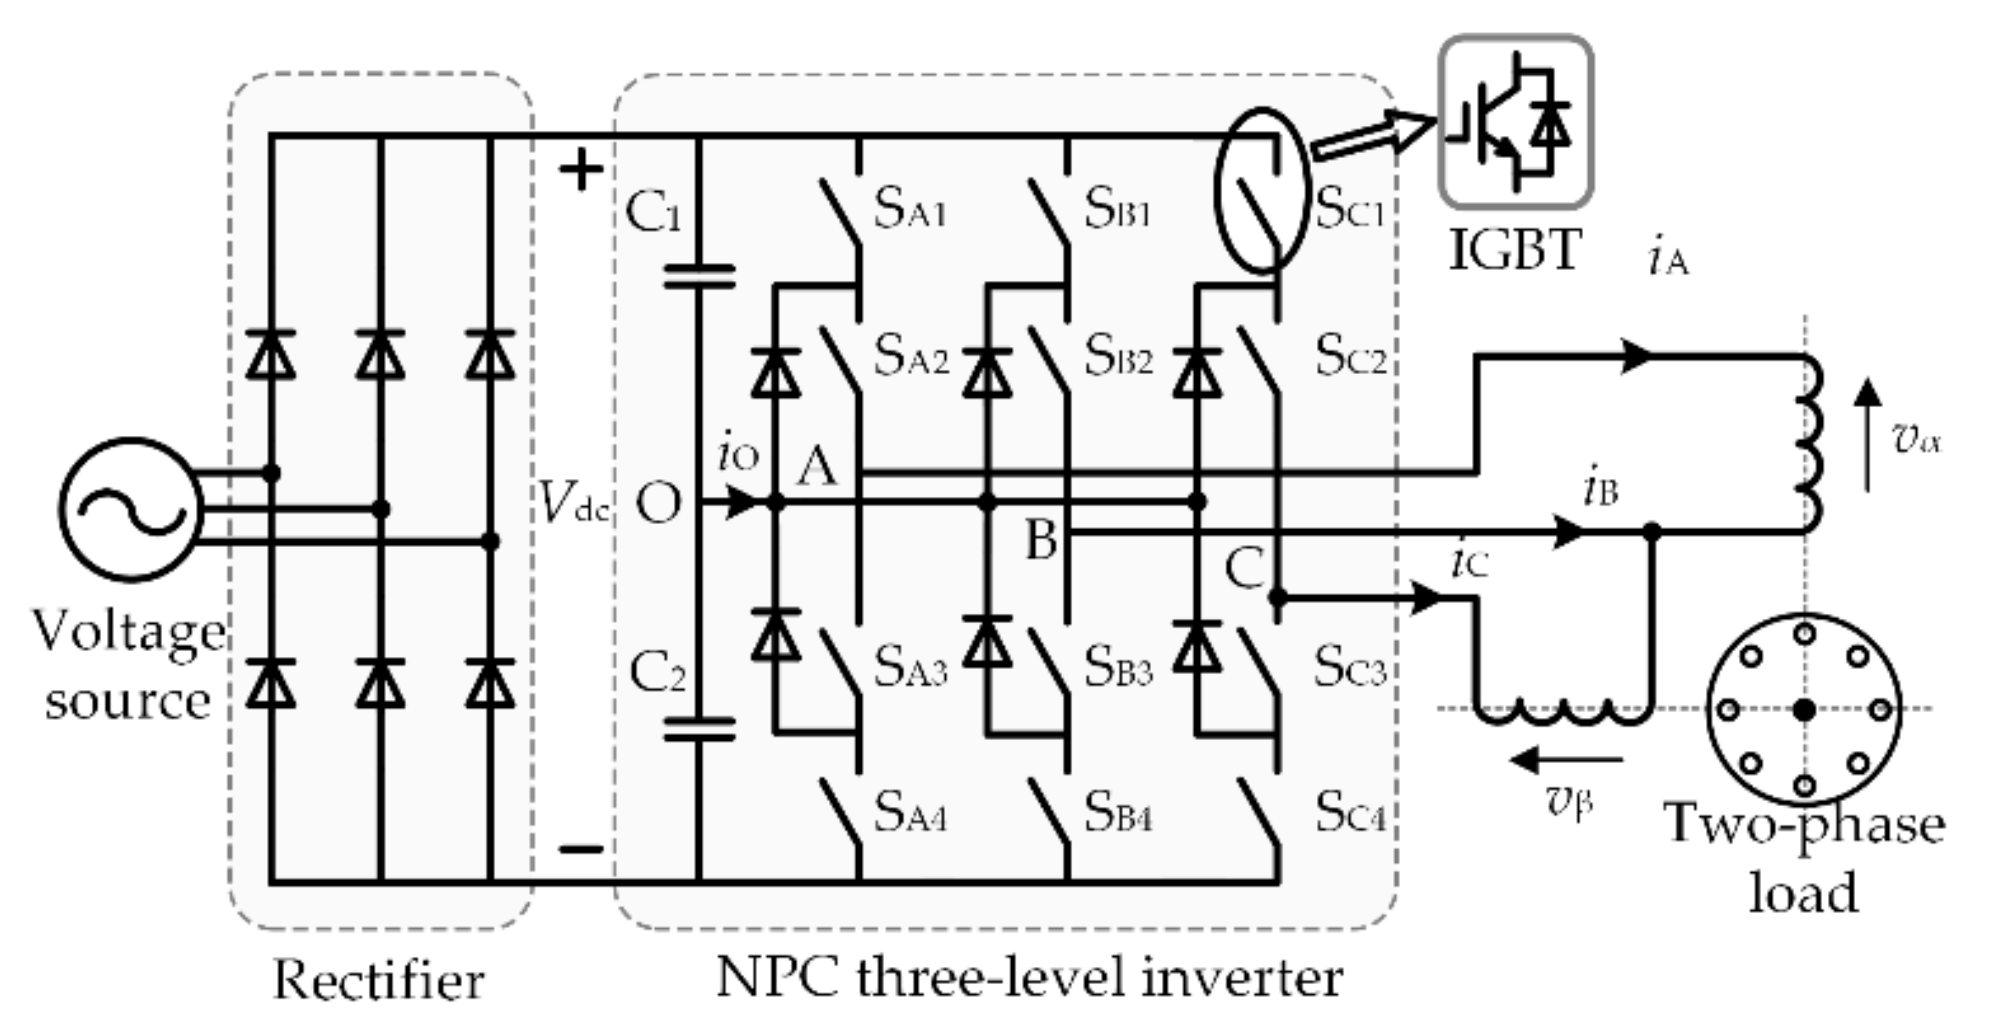 WEVJ | Free Full-Text | Discontinuous Space Vector PWM Strategy for Three-Phase  Three-Level Electric Vehicle Traction Inverter Fed Two-Phase Load | HTML